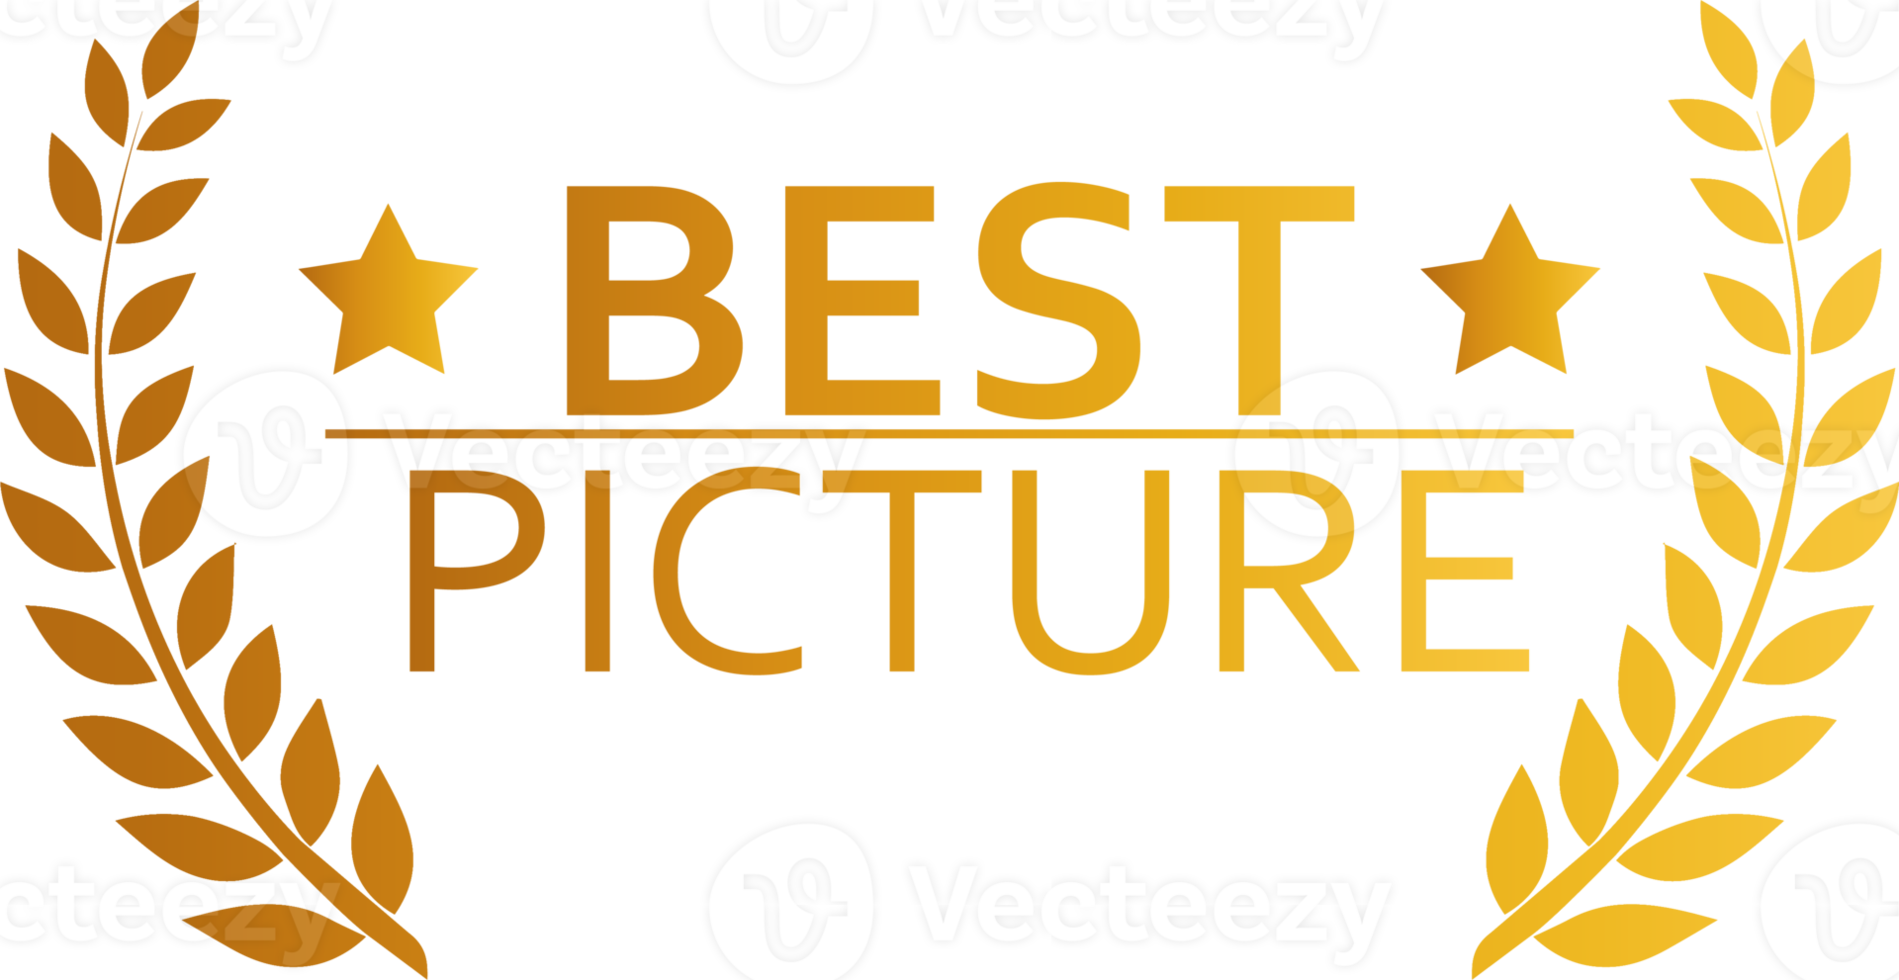 Best picture award illustration in golden colors. Tribute sign with laurel wreath. png